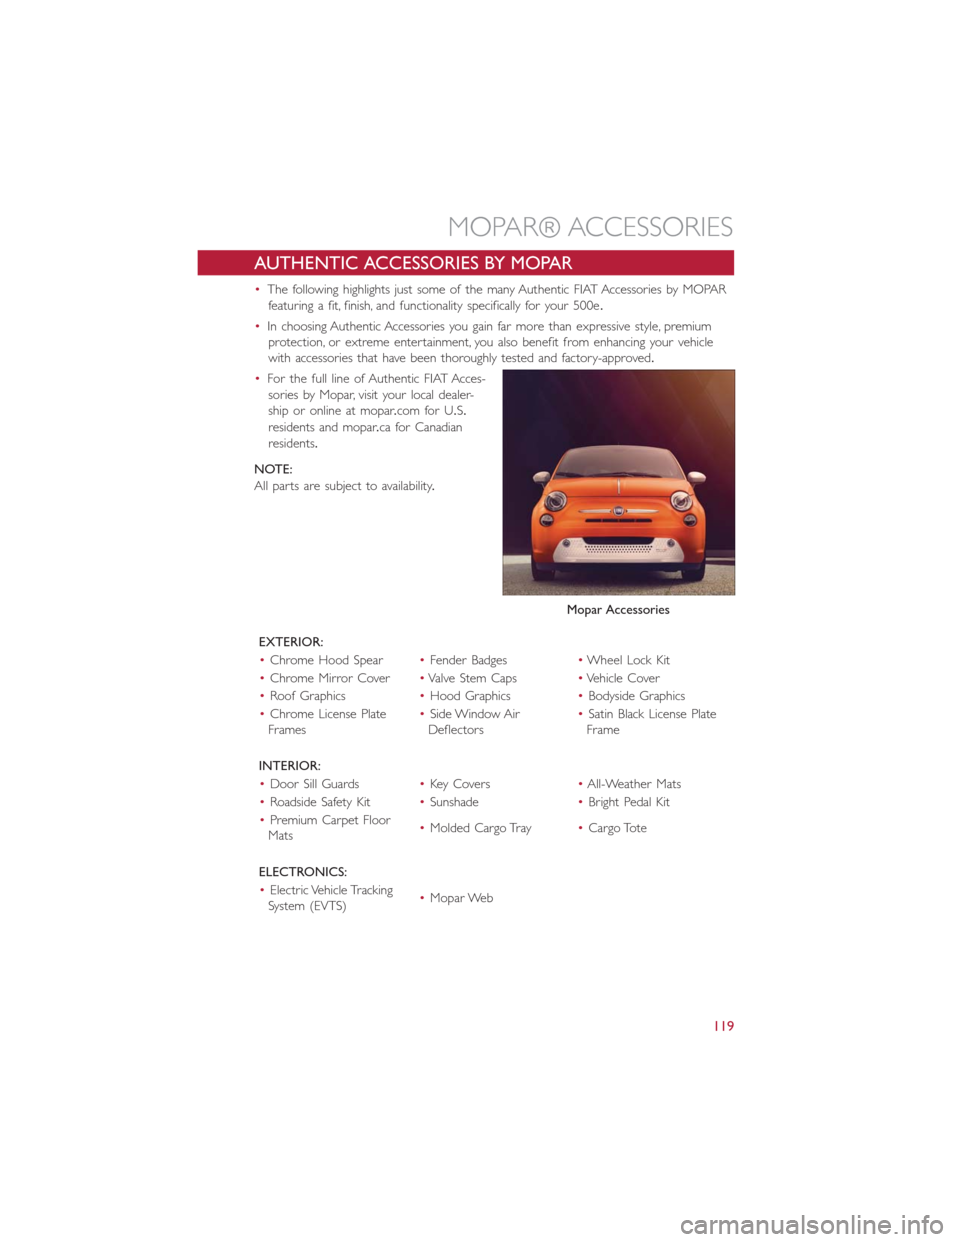 FIAT 500E 2016 2.G User Guide AUTHENTIC ACCESSORIES BY MOPAR
•The following highlights just some of the many Authentic FIAT Accessories by MOPAR
featuring a fit, finish, and functionality specifically for your 500e.
•In choosi